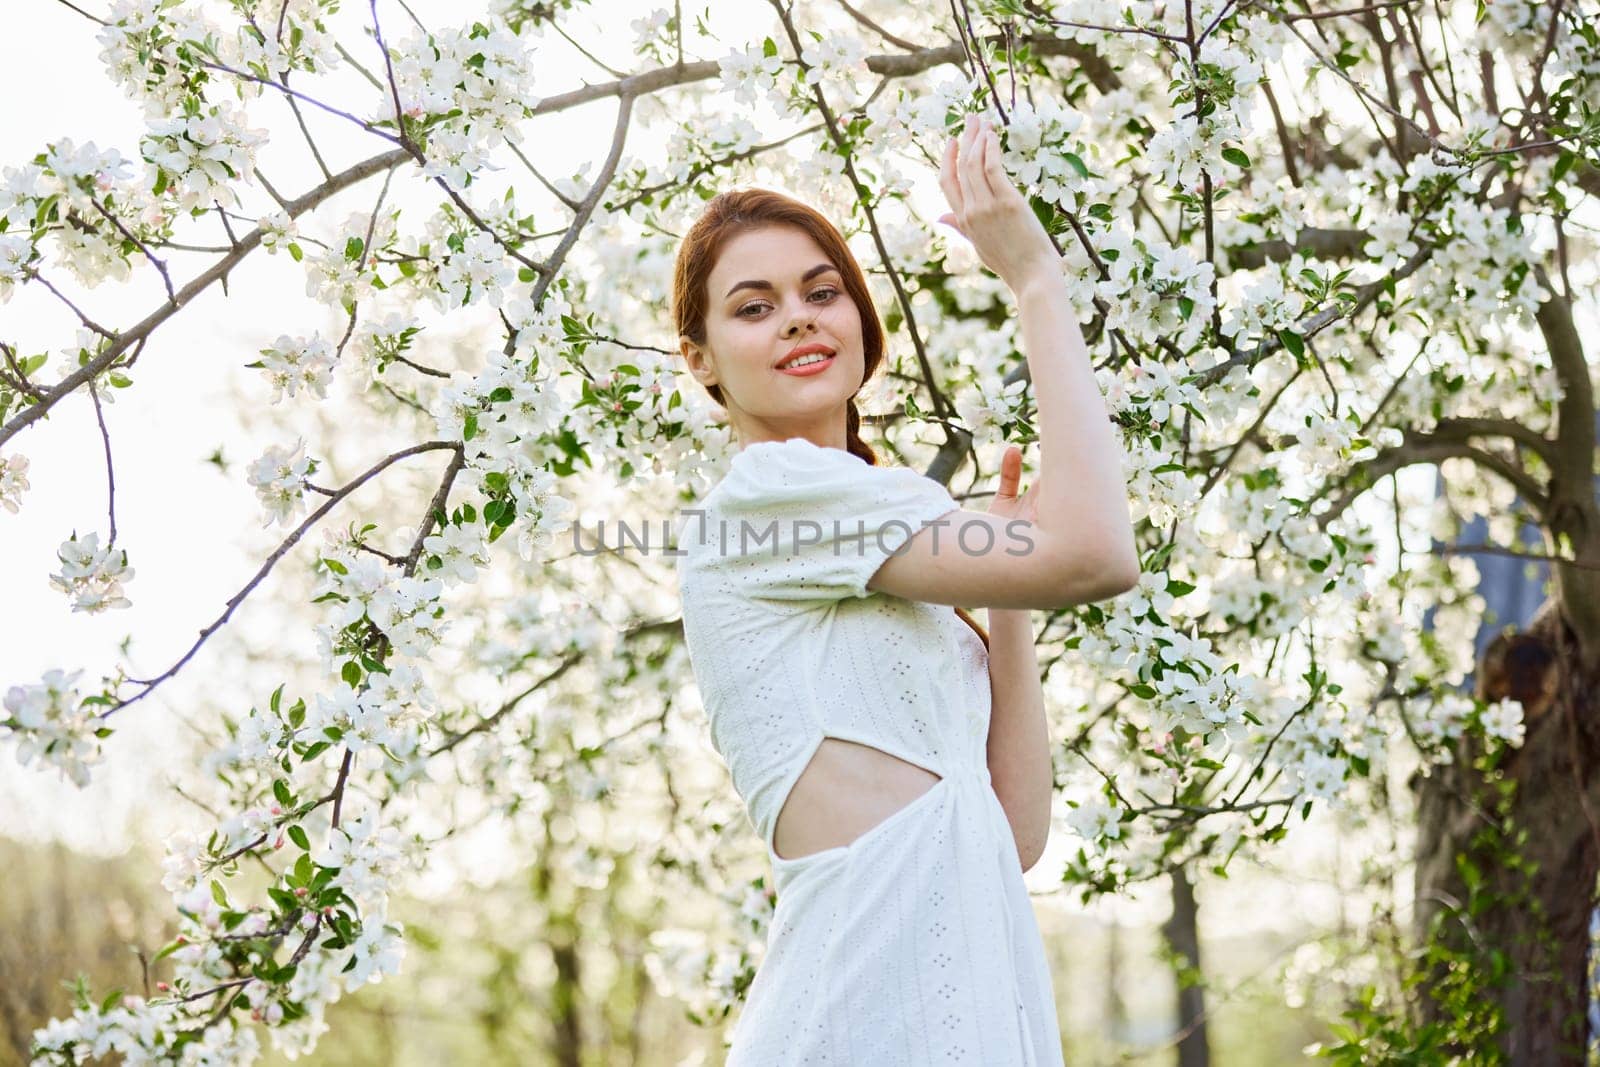 a slender, happy woman in a light dress poses next to a flowering tree in the countryside by Vichizh